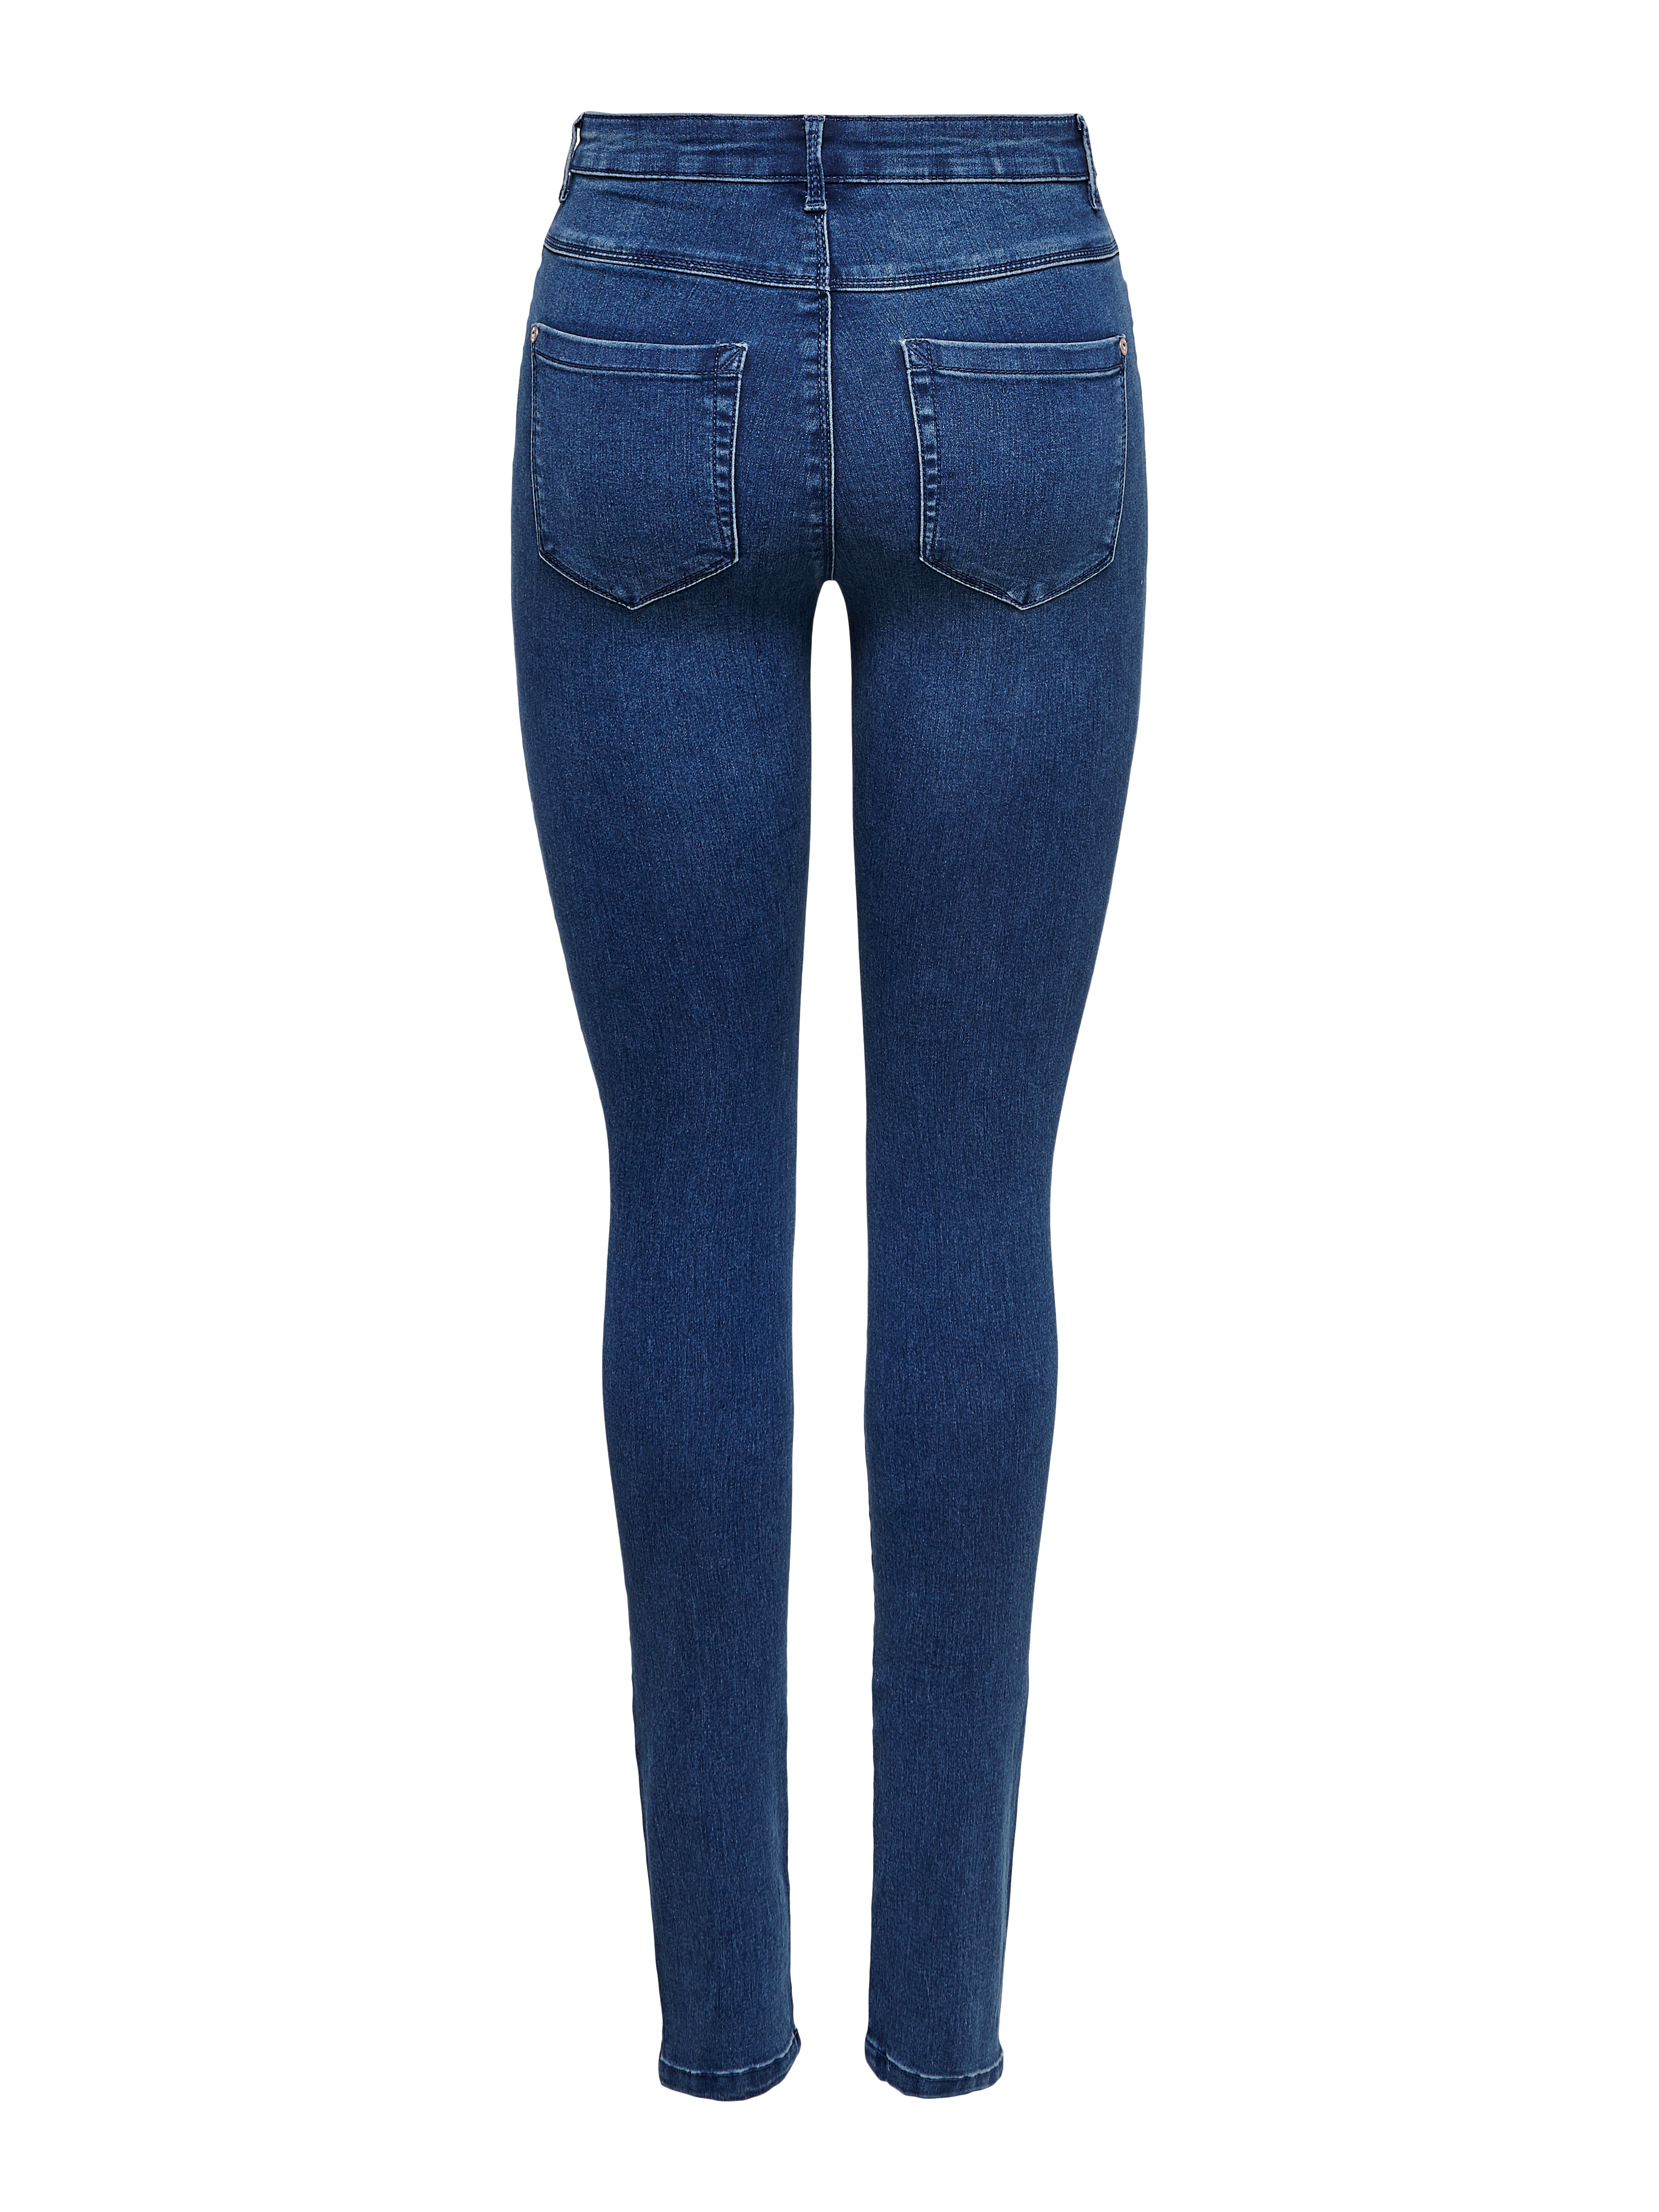 Only Onlroyal High SK Jeans Pim600 Noos Vaqueros para Mujer 